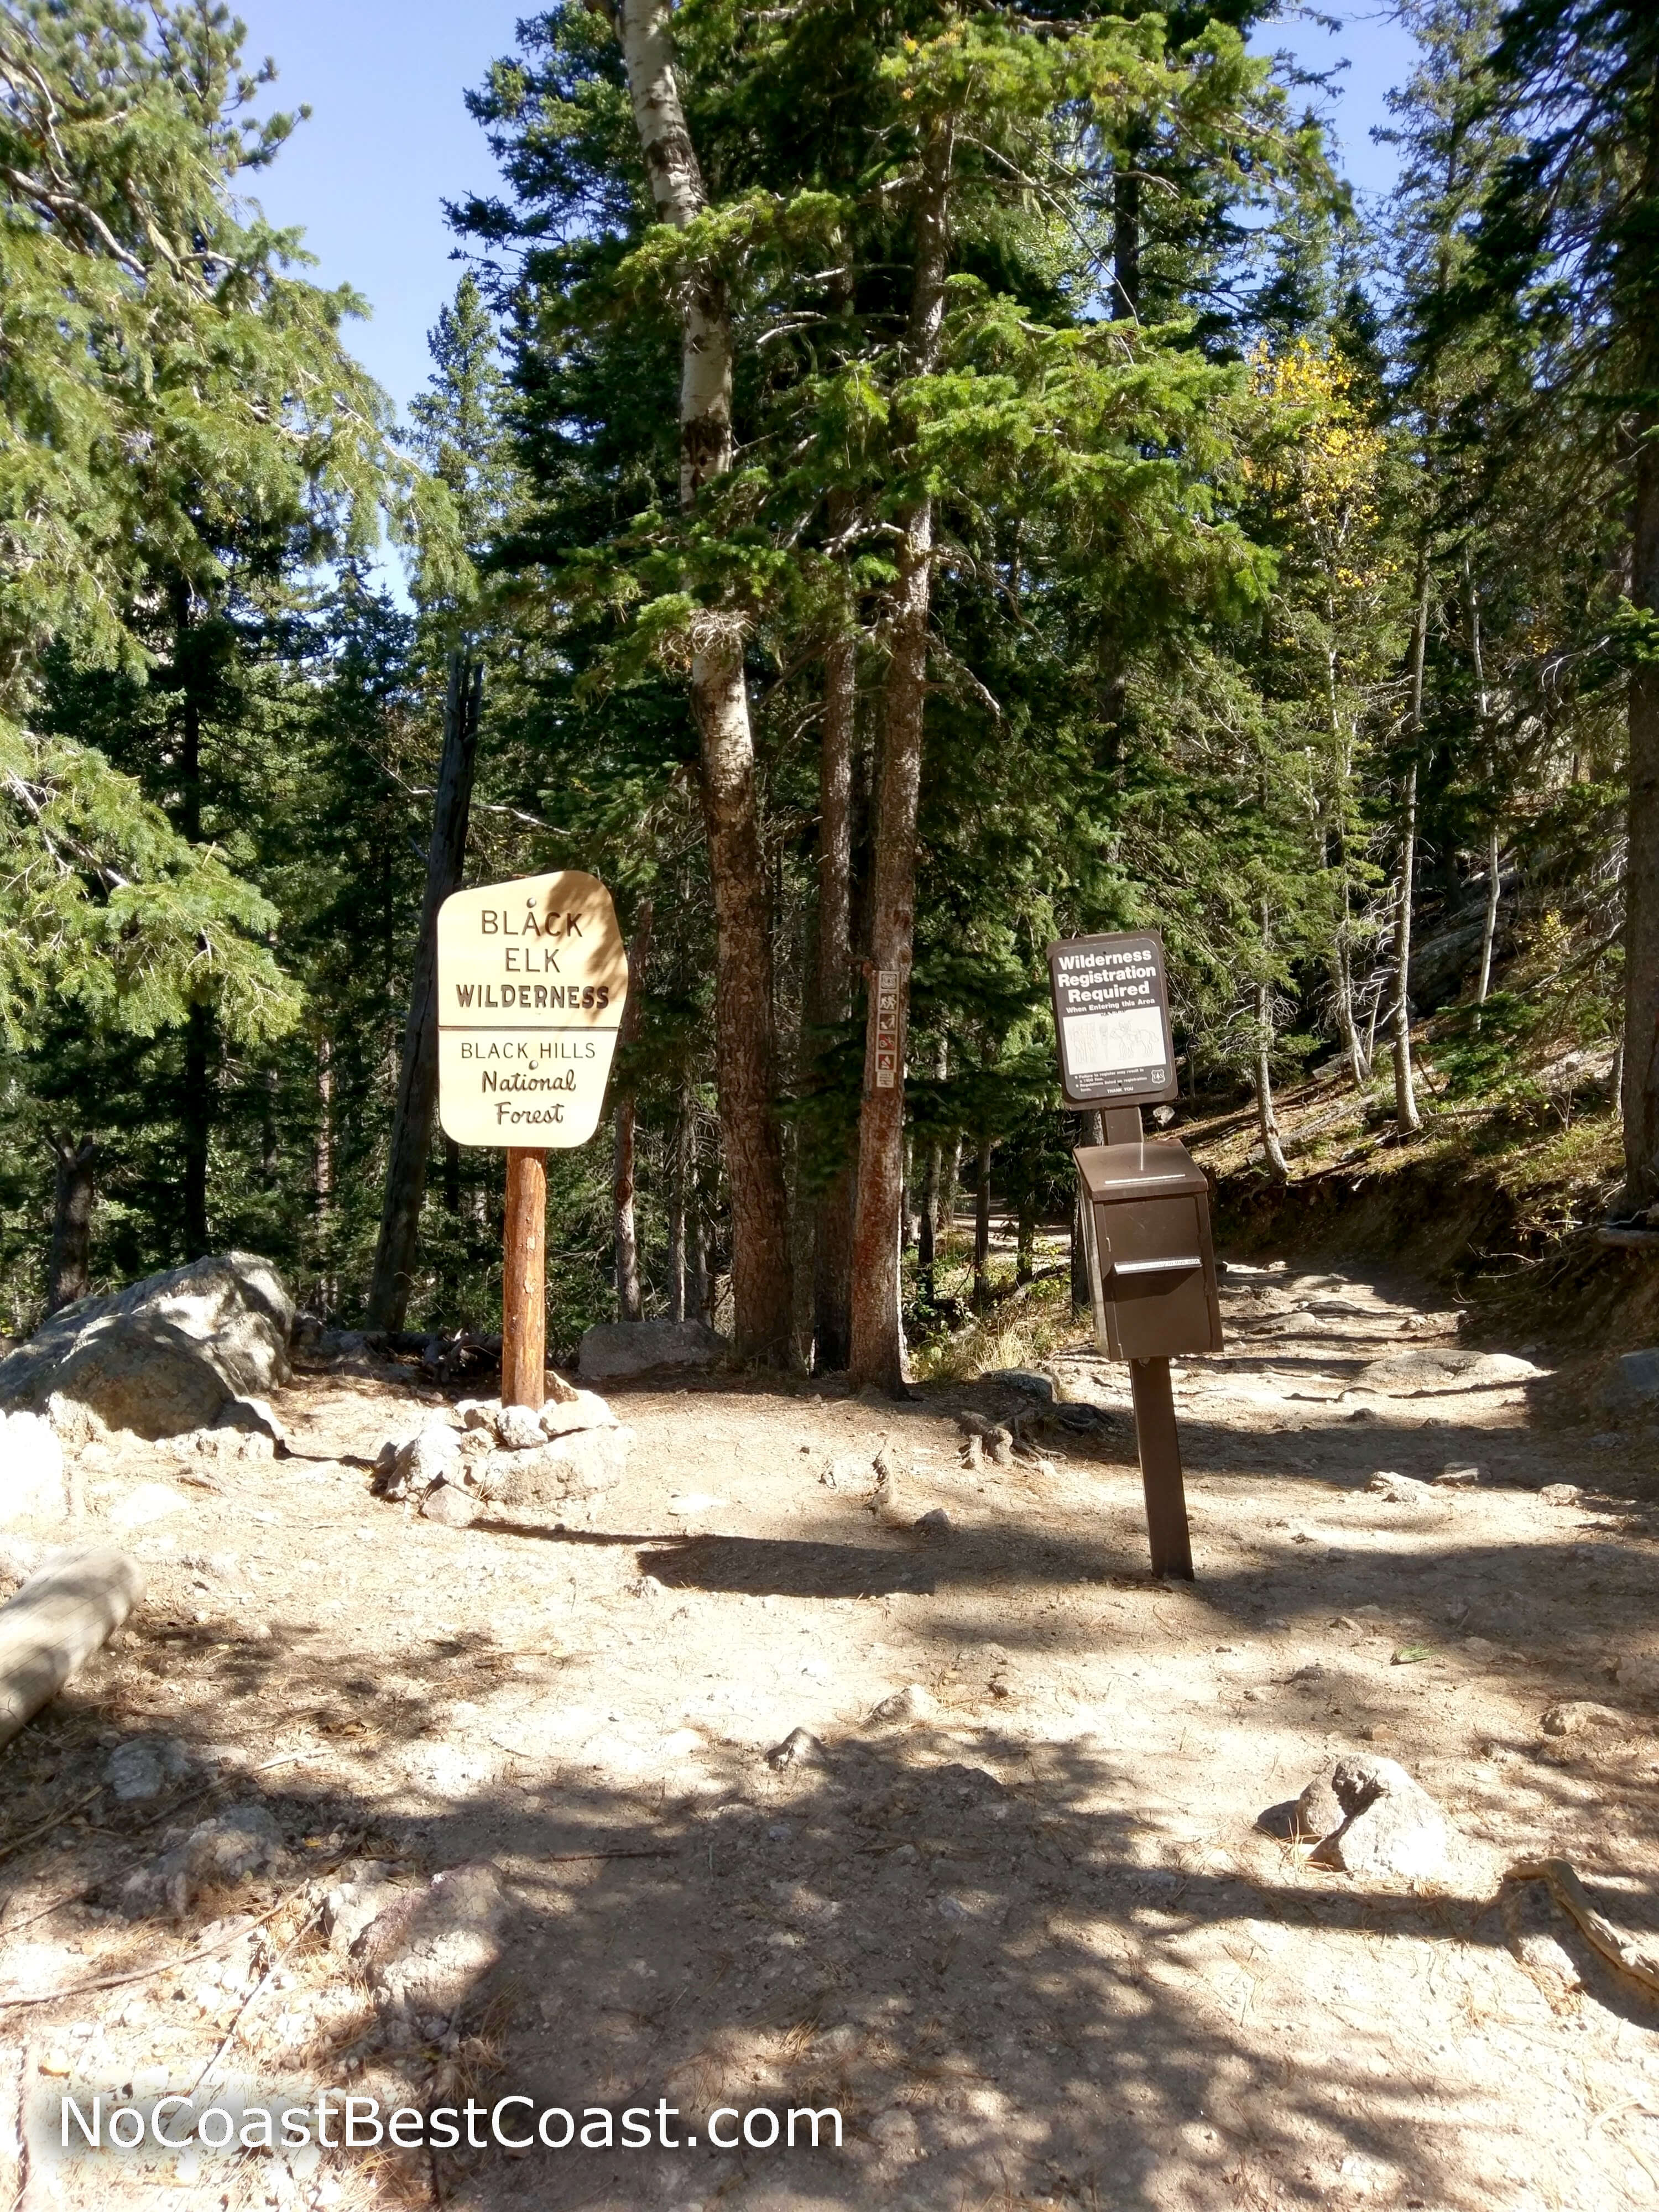 All hikers must stop and fill out a permit form when entering the Black Elk Wilderness